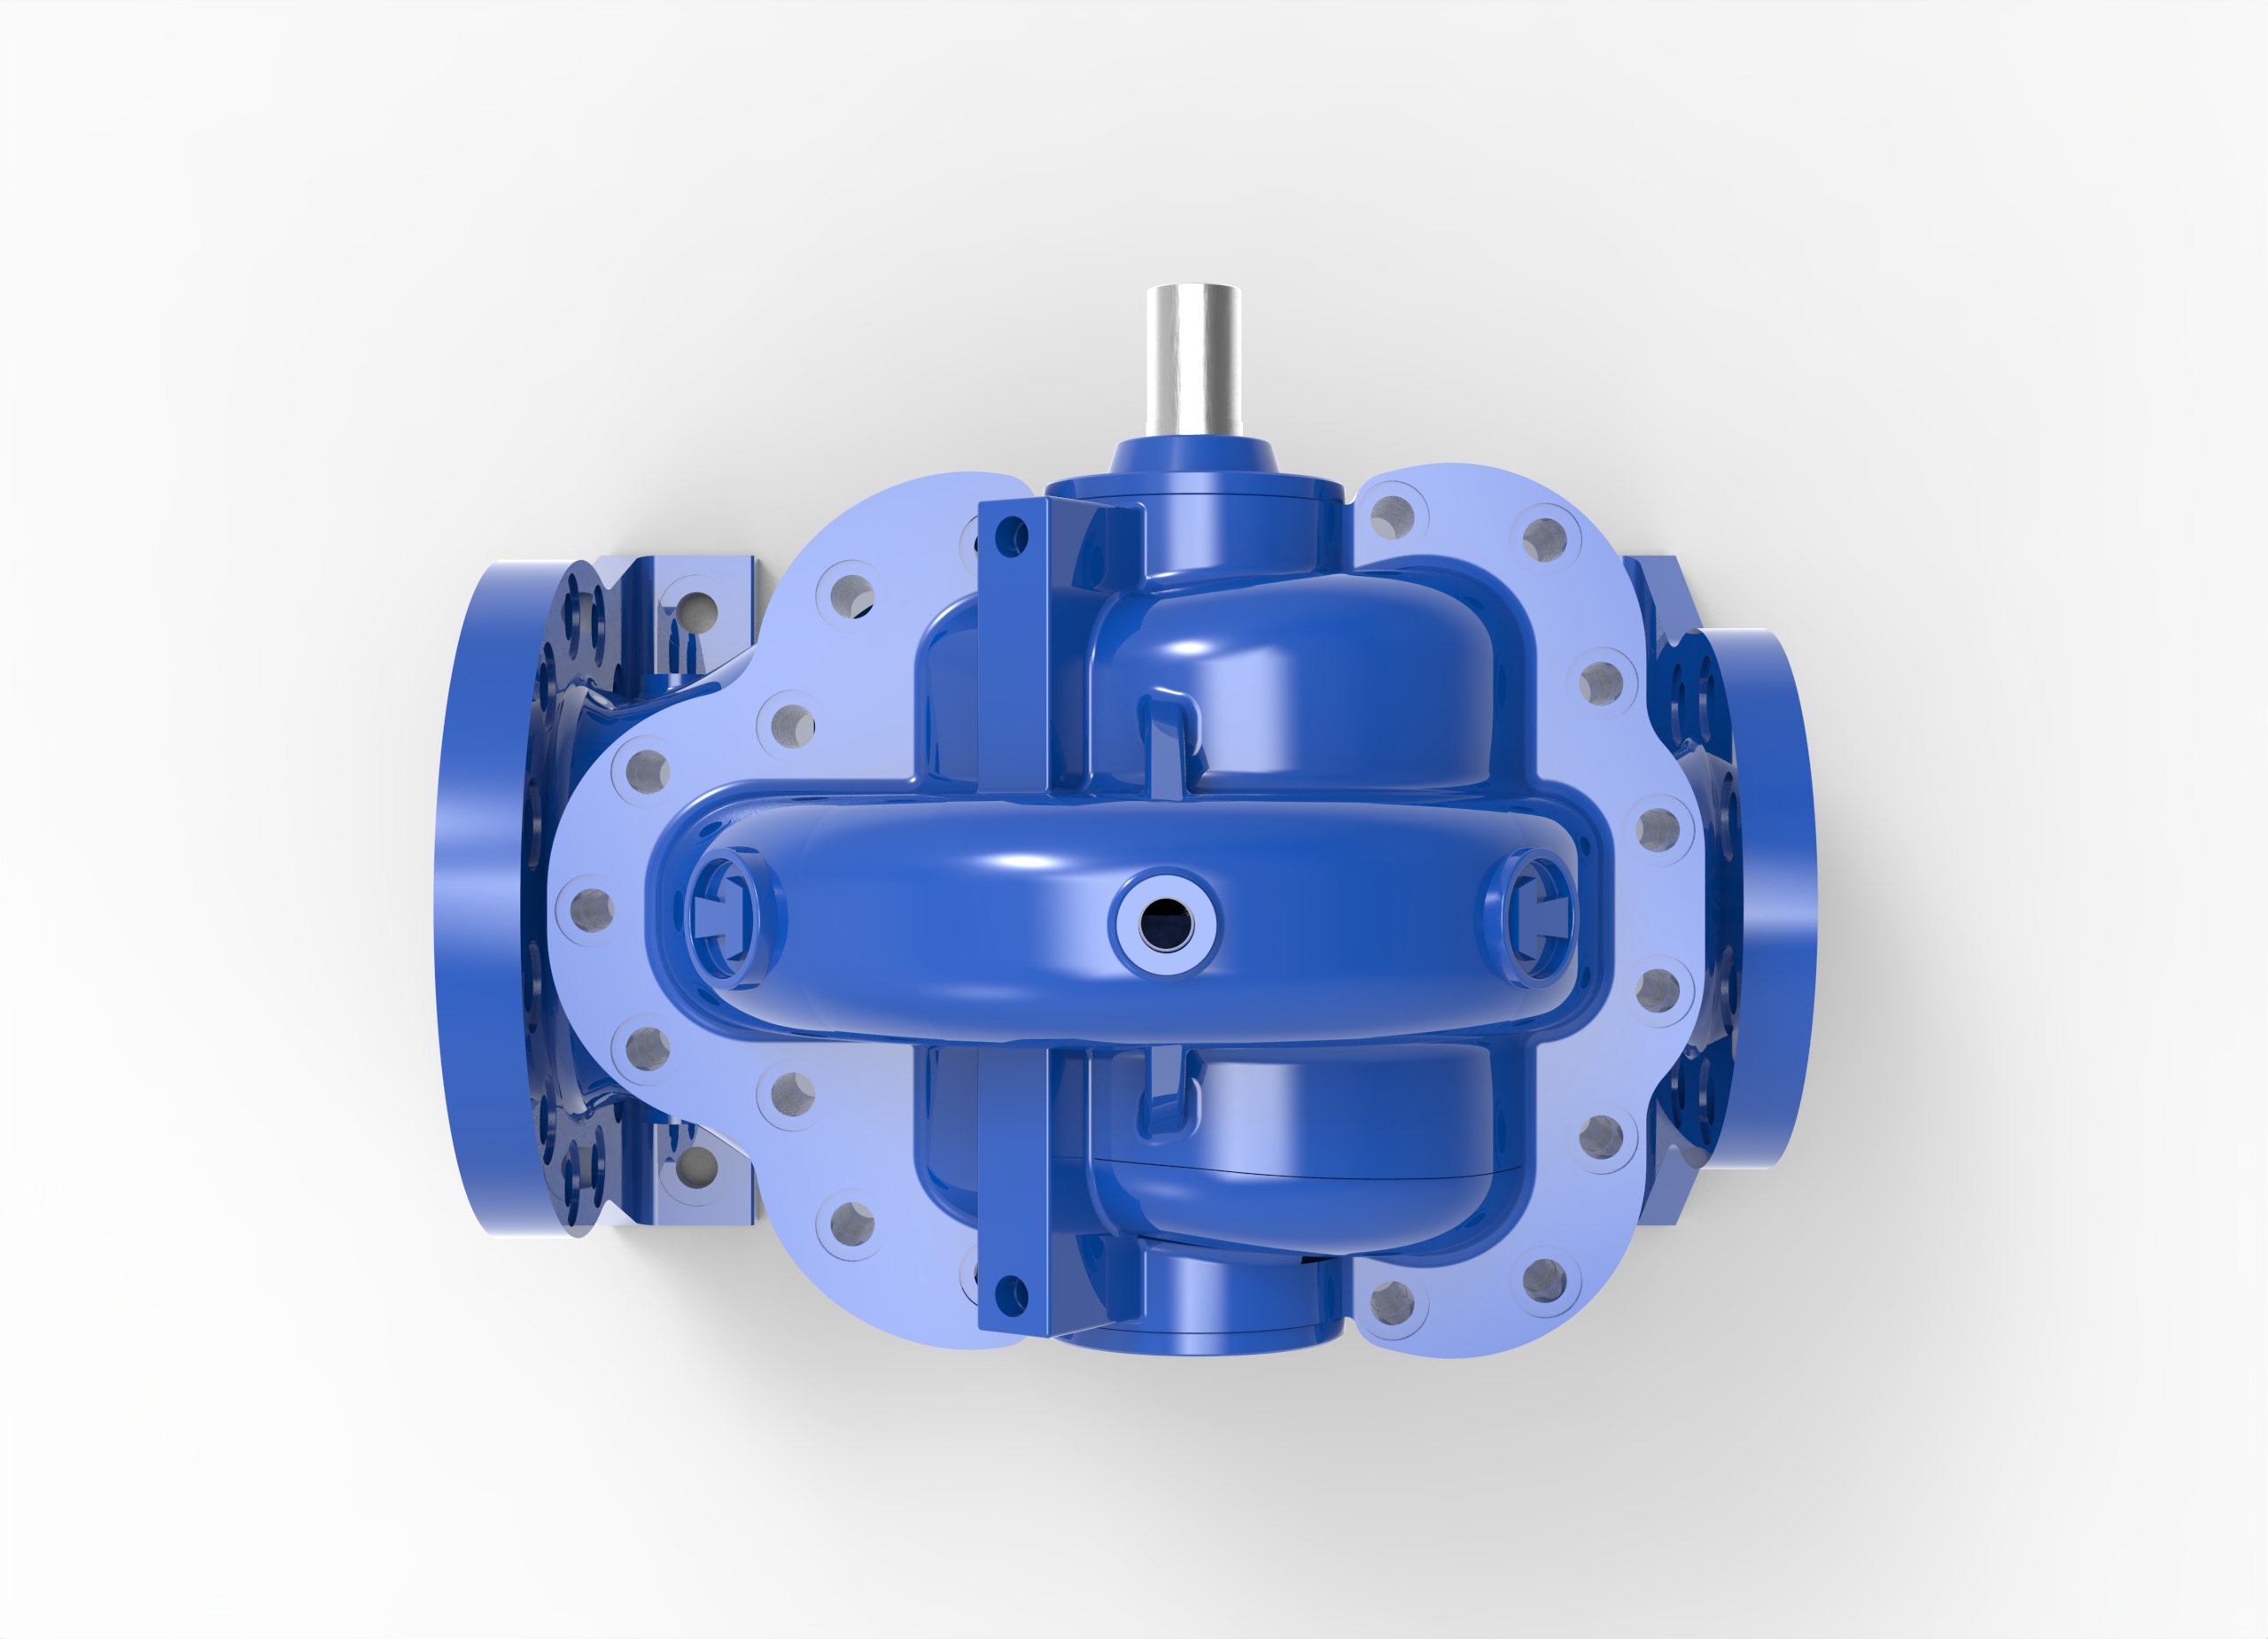 Top view of a Termomeccanica Pompe HSS Patented Centrifugal Pump manufactured by Trillium Flow Technologies